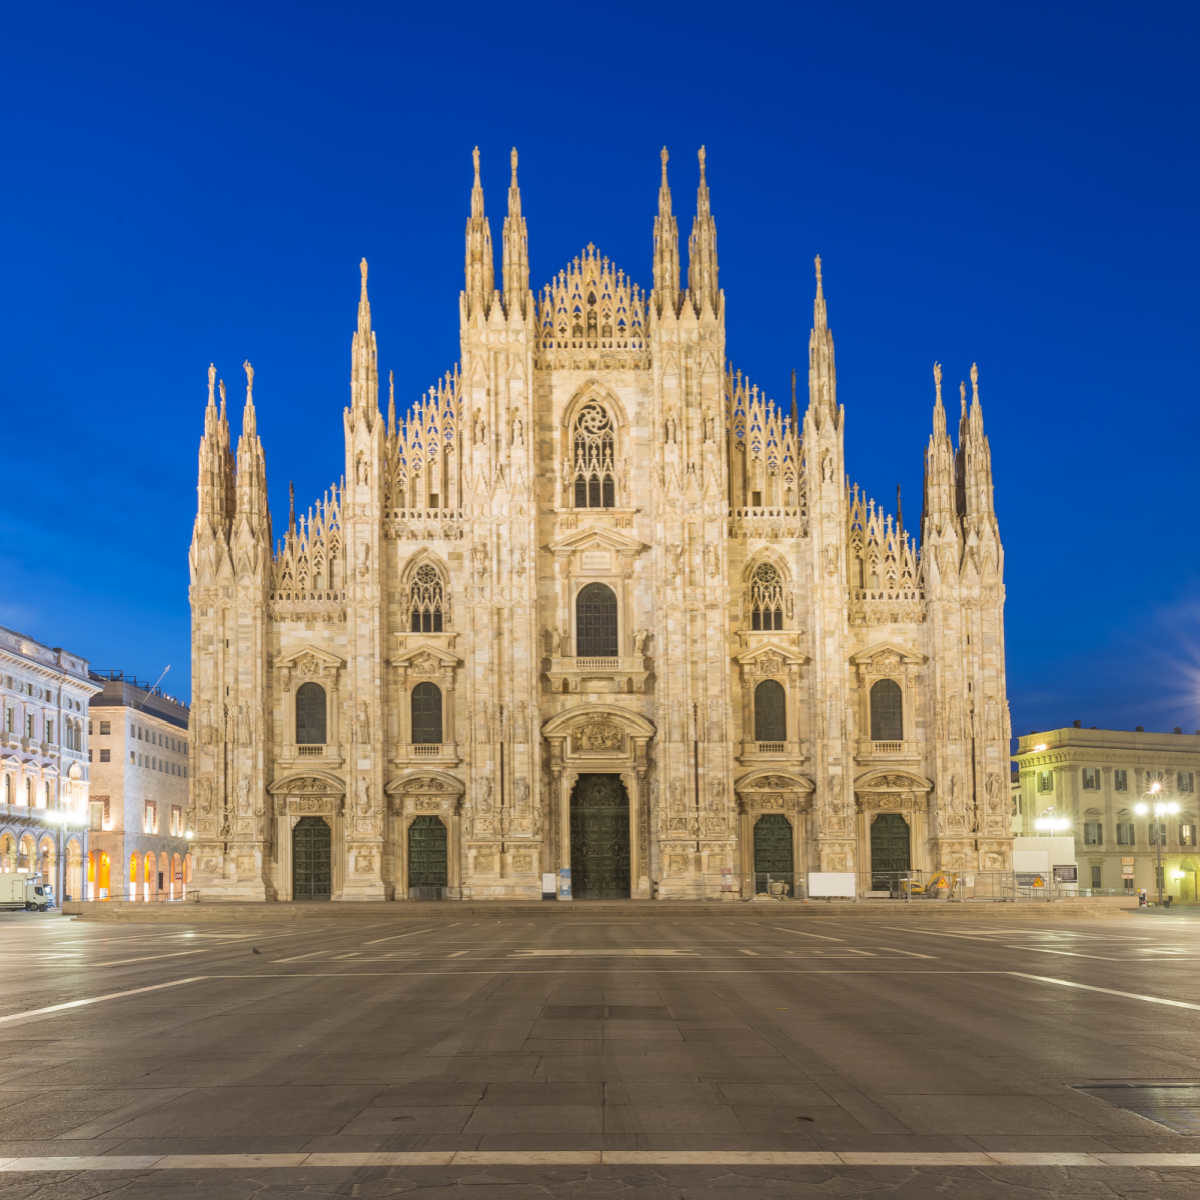 Twilight of Duomo Milan Cathedral in Italy